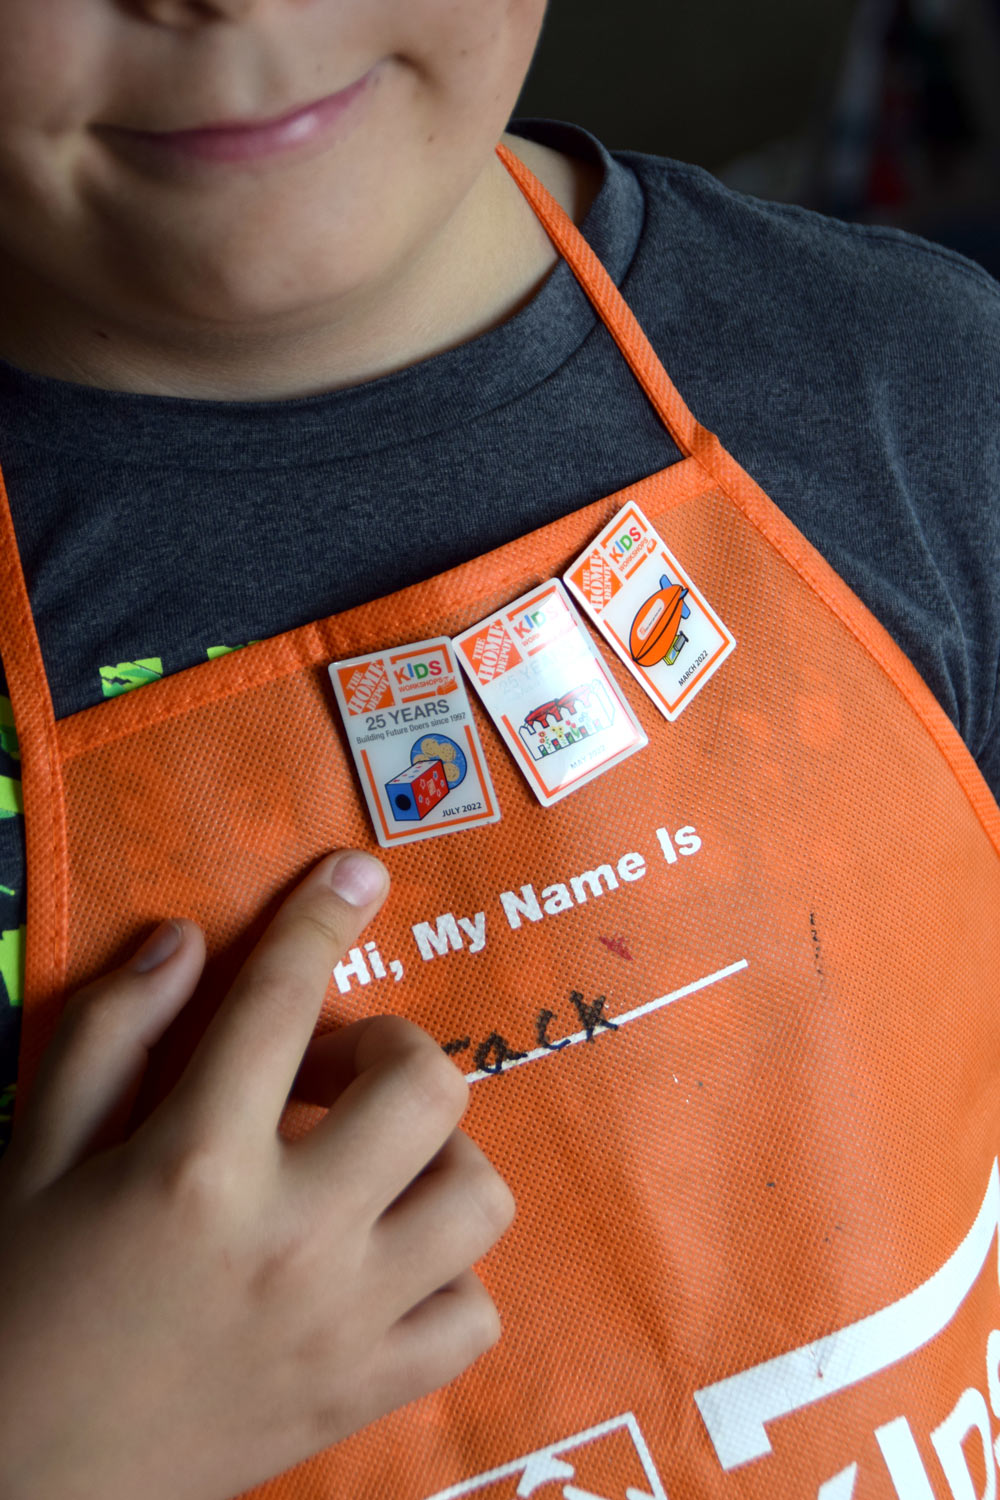 Boy with a Home Depot apron pointing to a certification pin.